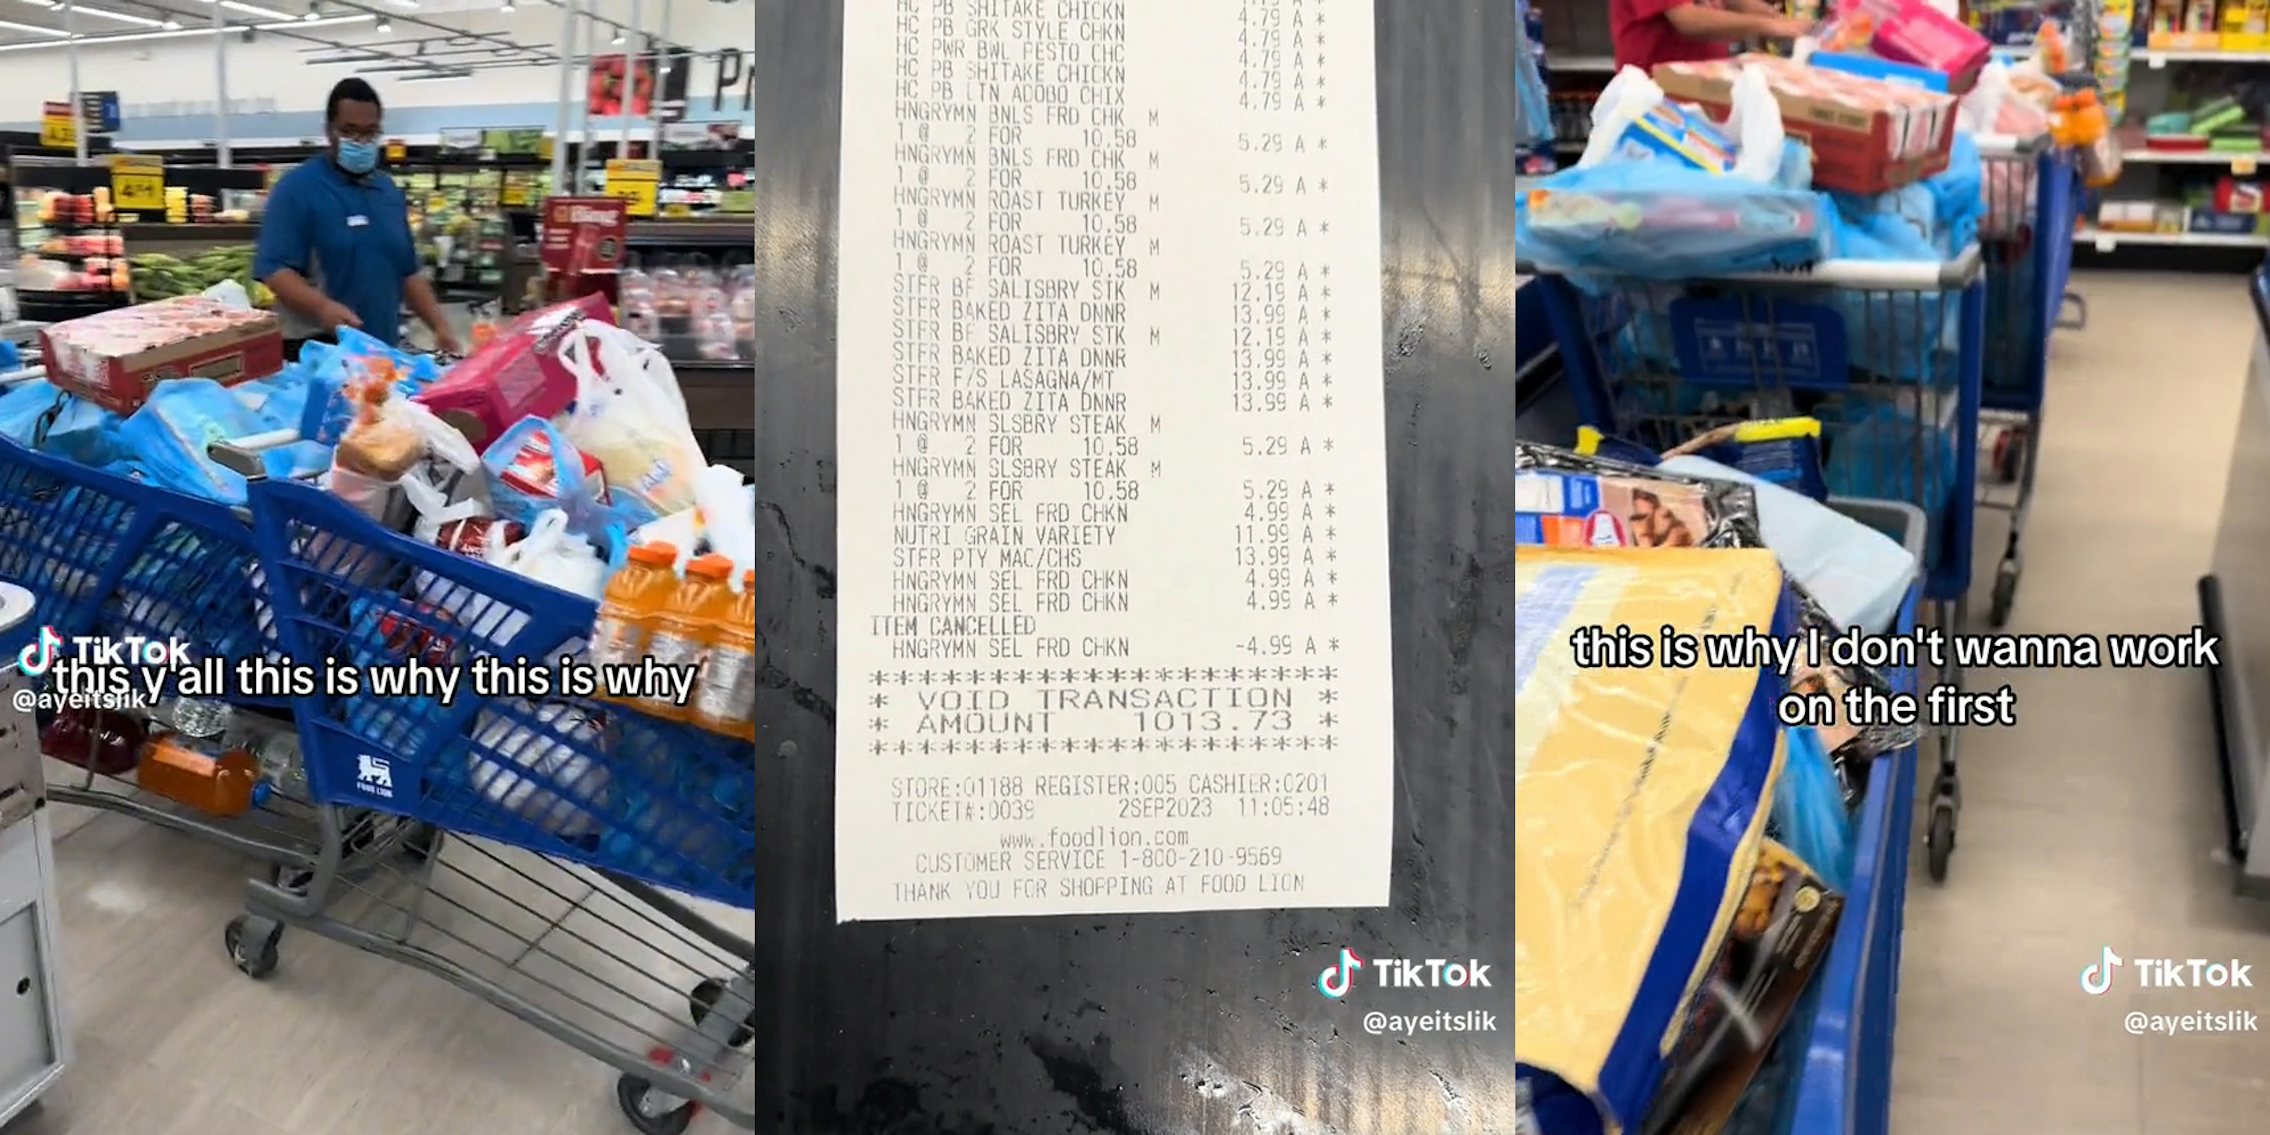 carts full of food in checkout line (l&r) $1013.73 voided transaction receipt (c)